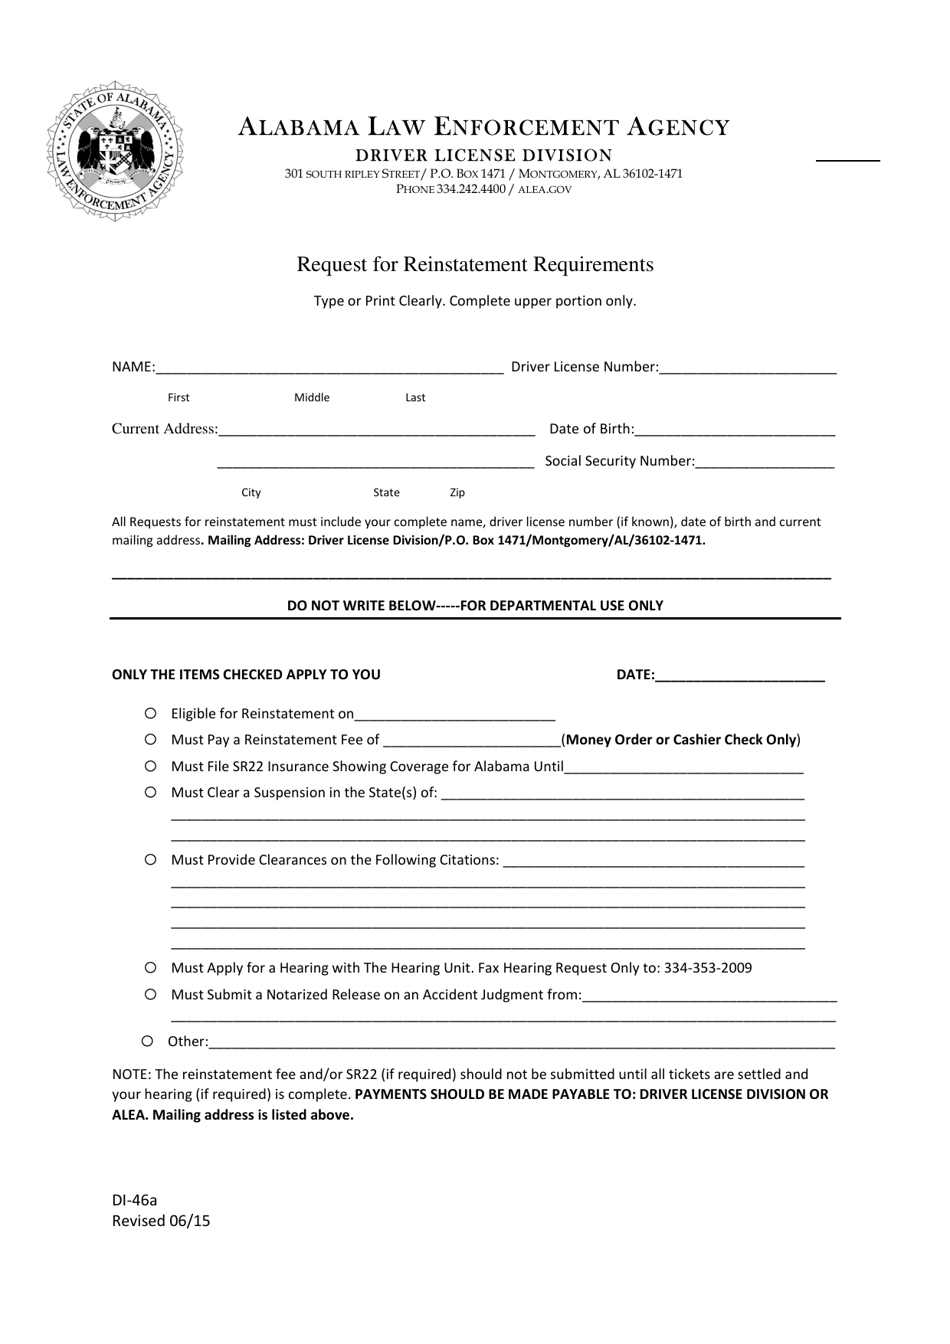 Form DI-46A Request for Reinstatement Requirements - Alabama, Page 1